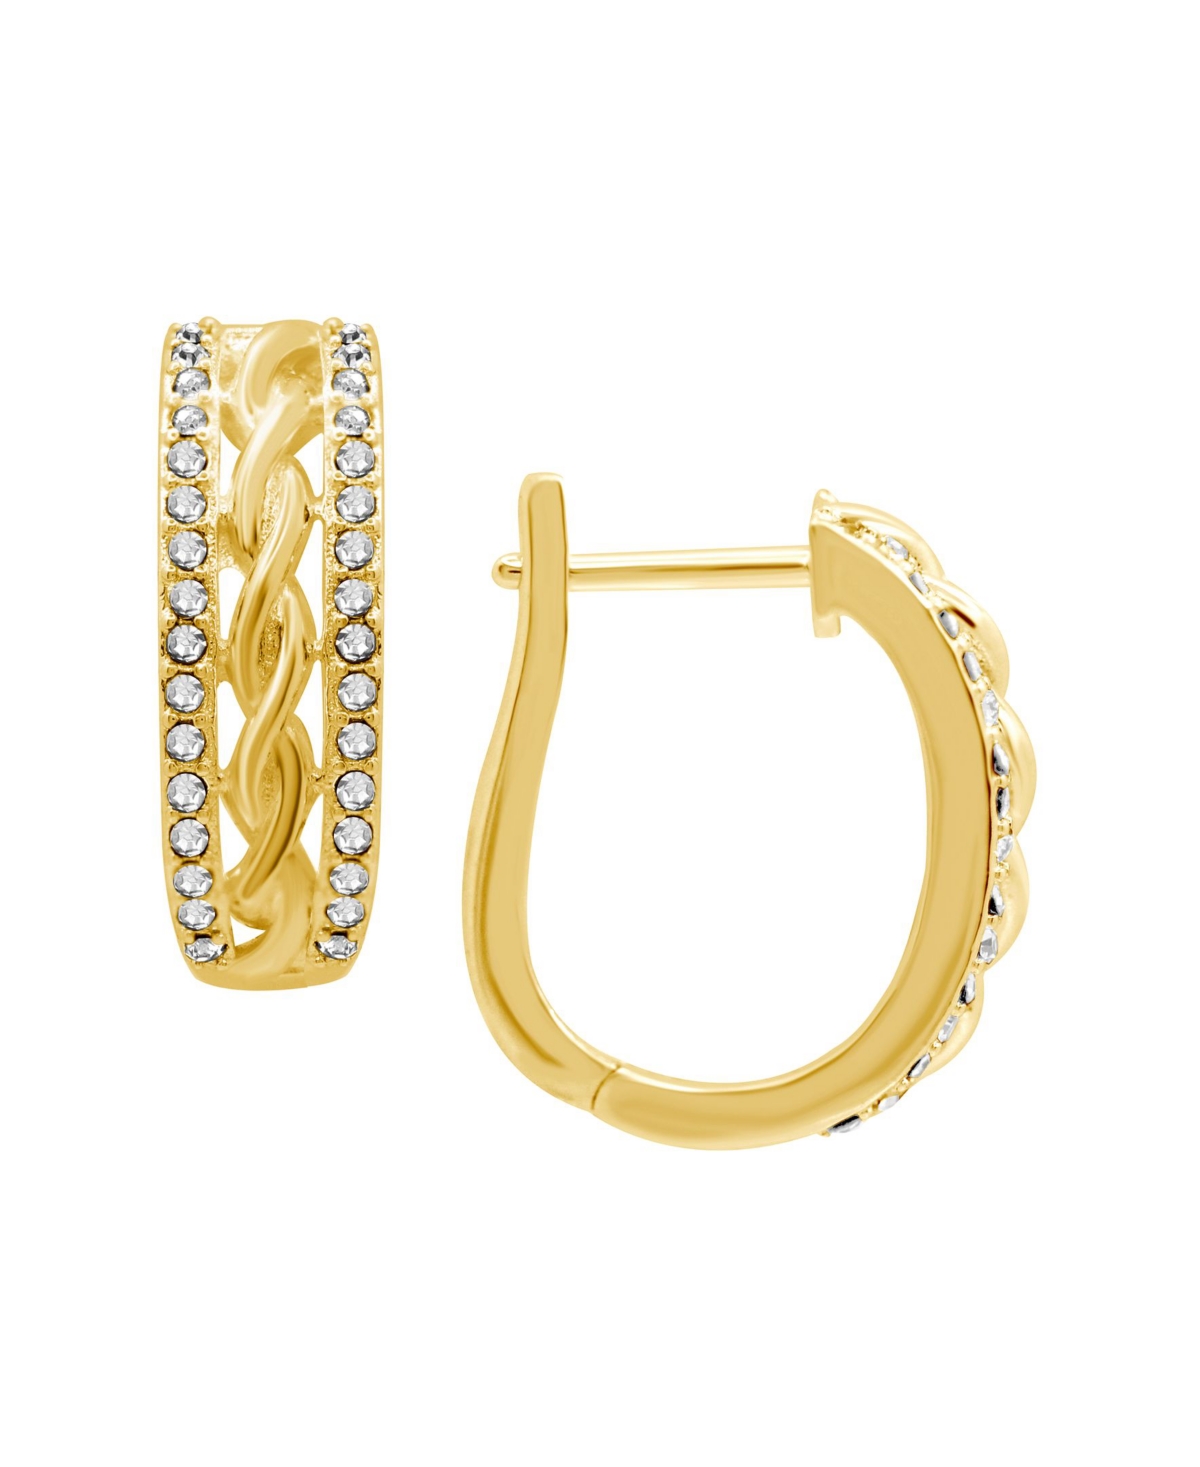 Silver or Gold Plated Twist Center Hinge Hoop Earrings - Gold-Plated